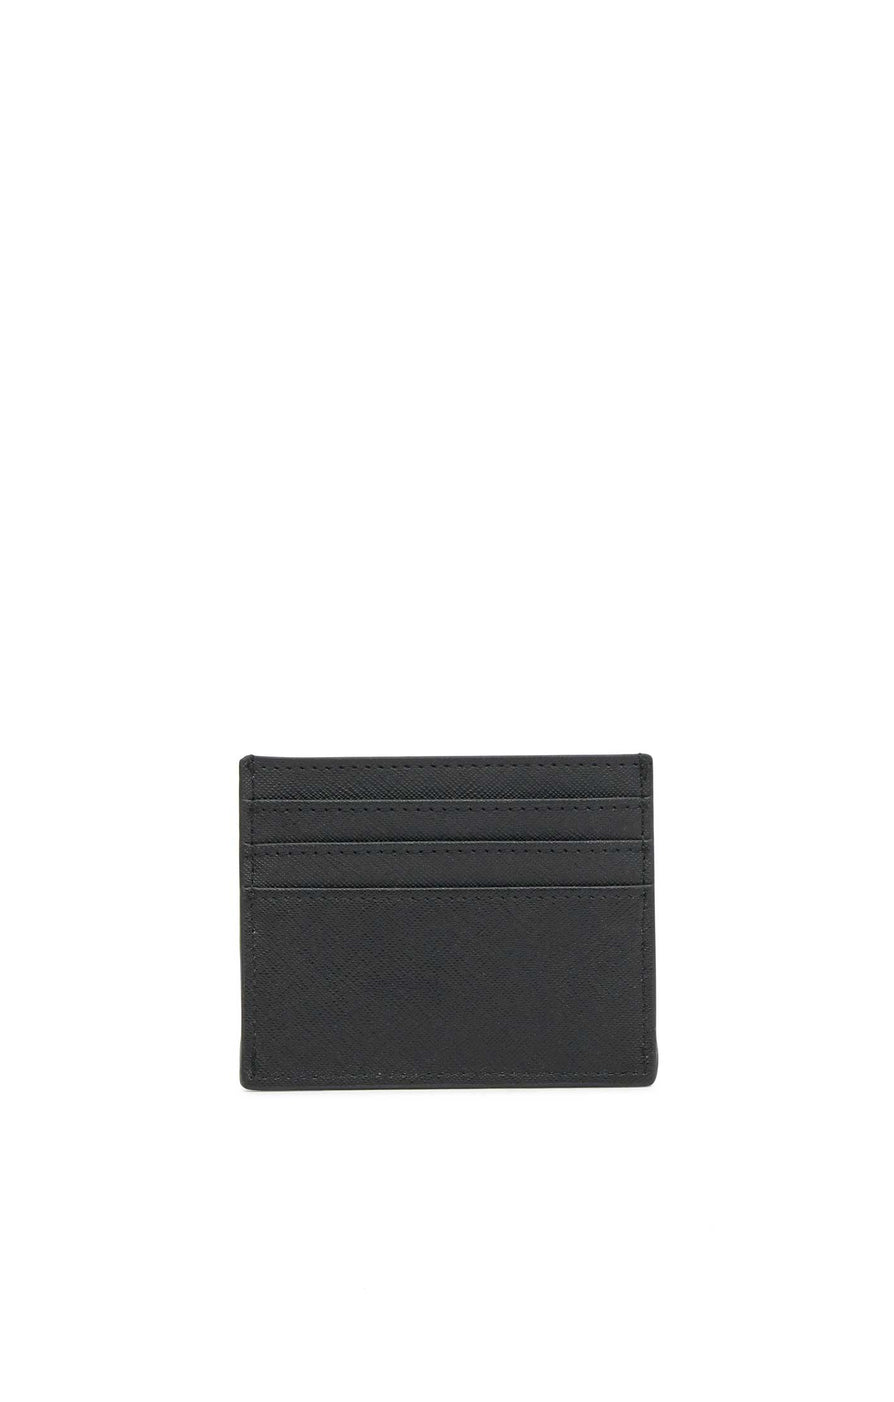 THE KELLY GOLD WALLET | Ghost